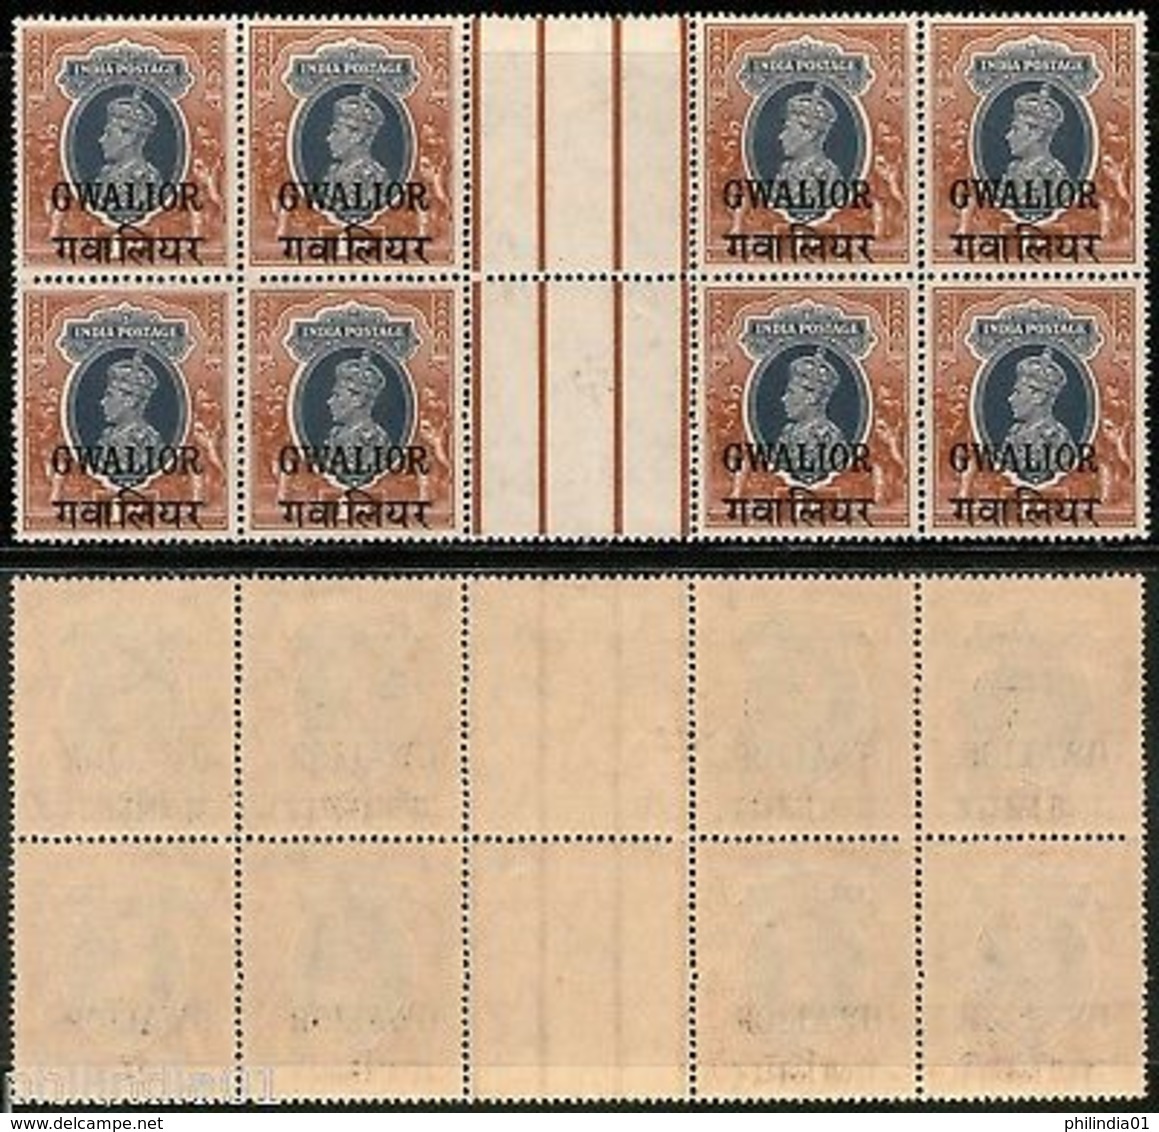 India Gwalior State 1Re KG VI SG 112 / Sc 112 Hori. Gutter BLK/4 MNH Cat �104 - Gwalior